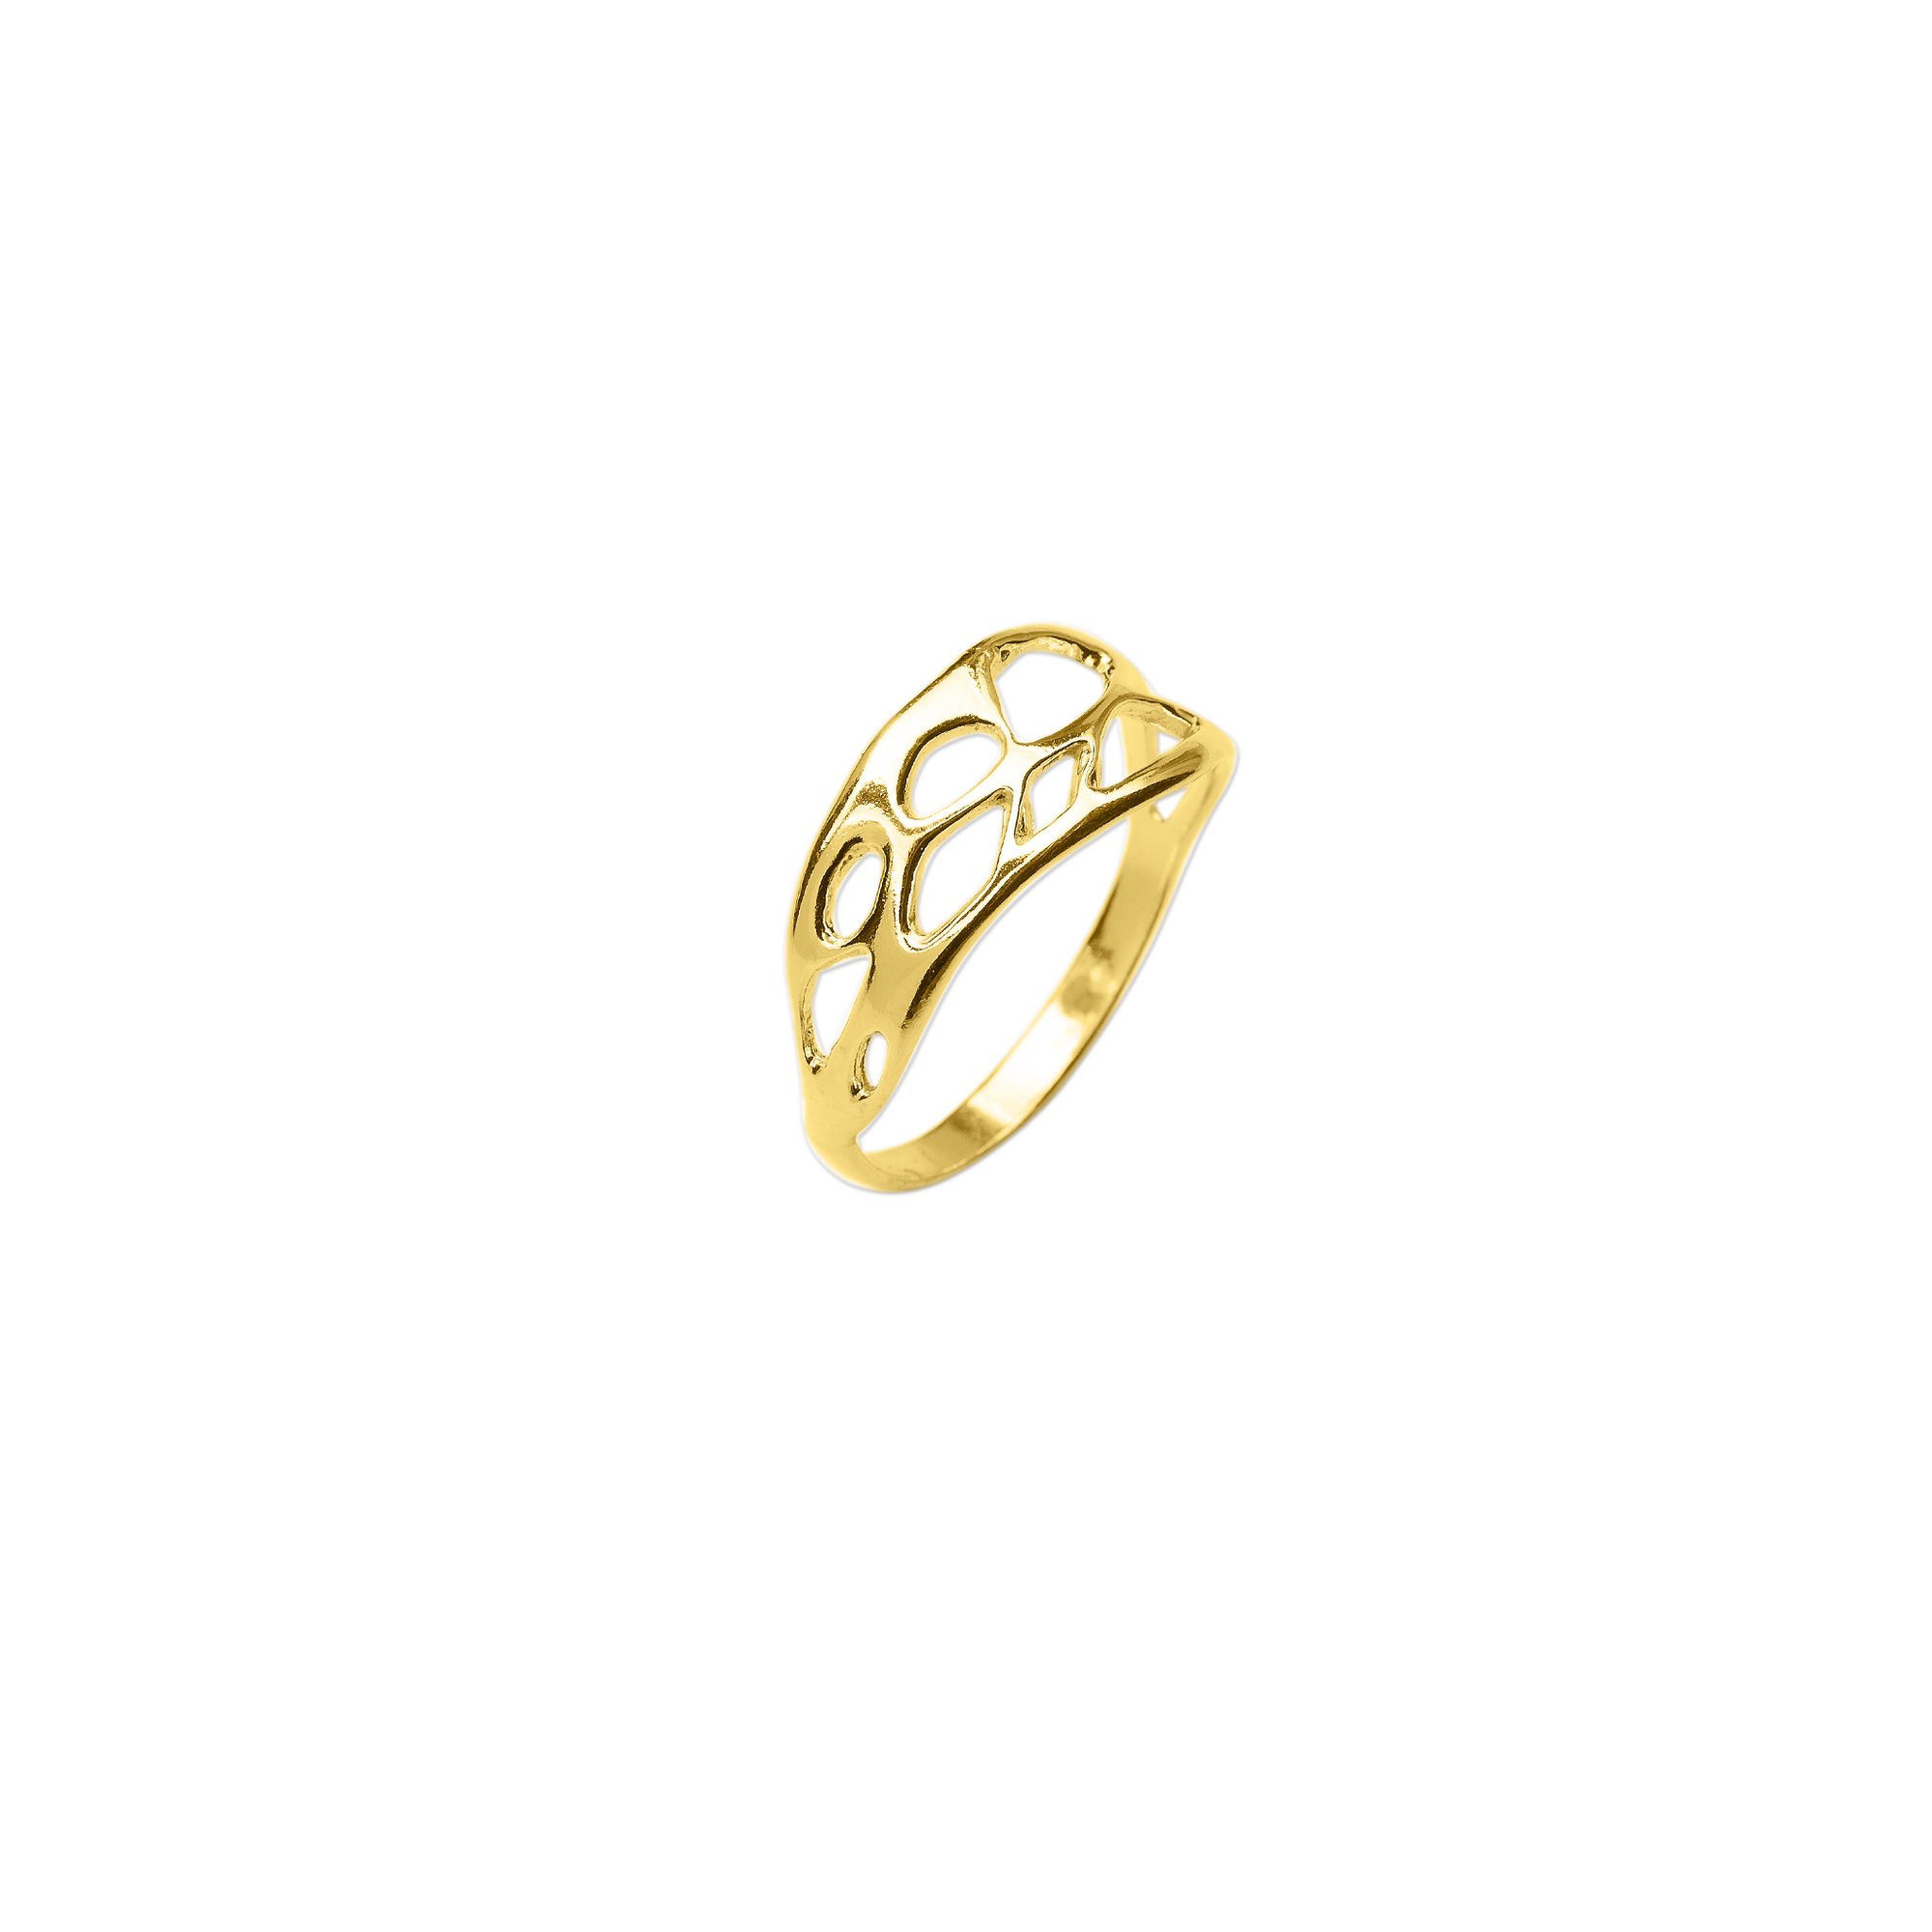 gold cactus ring on white background